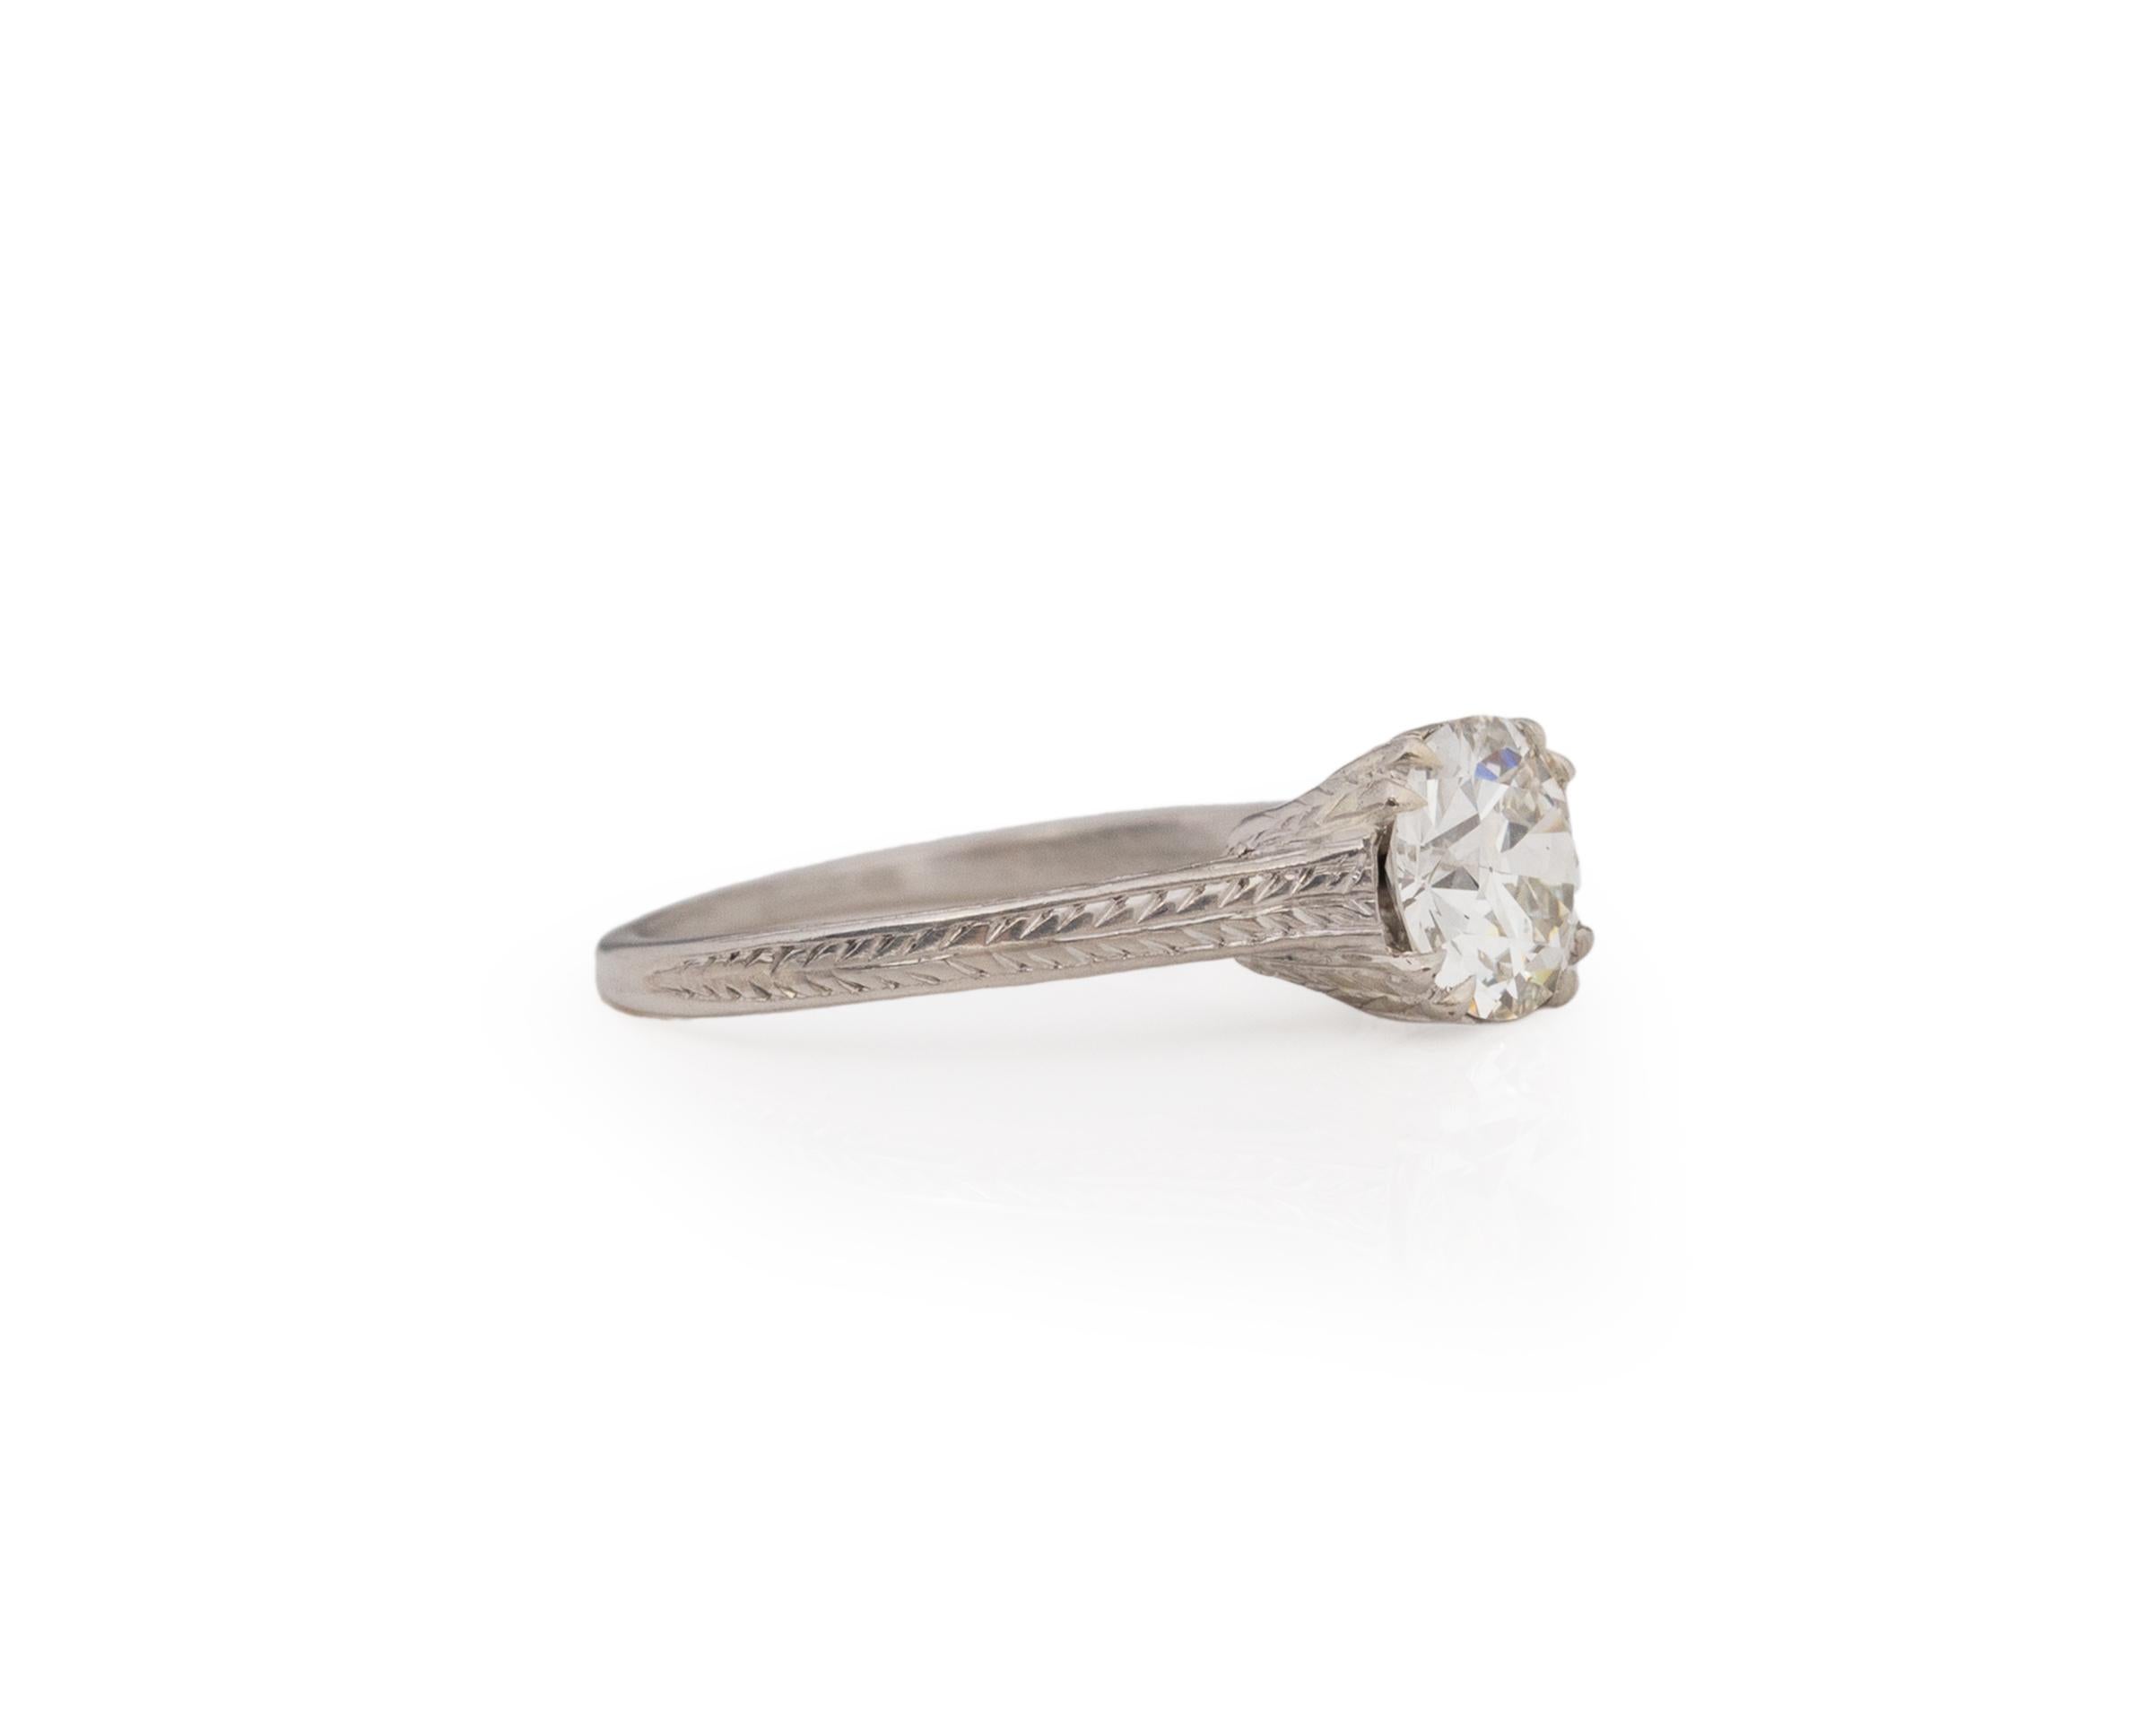 Ring Size: 4.75
Metal Type: Platinum [Hallmarked, and Tested]
Weight: 2.63grams

Center Diamond Details:
GIA REPORT #:6227597360
Weight: 1.02ct
Cut: Old European brilliant
Color: I
Clarity: VS2
Measurements: 6.73mm x 6.61mm x 3.81mm

Finger to Top